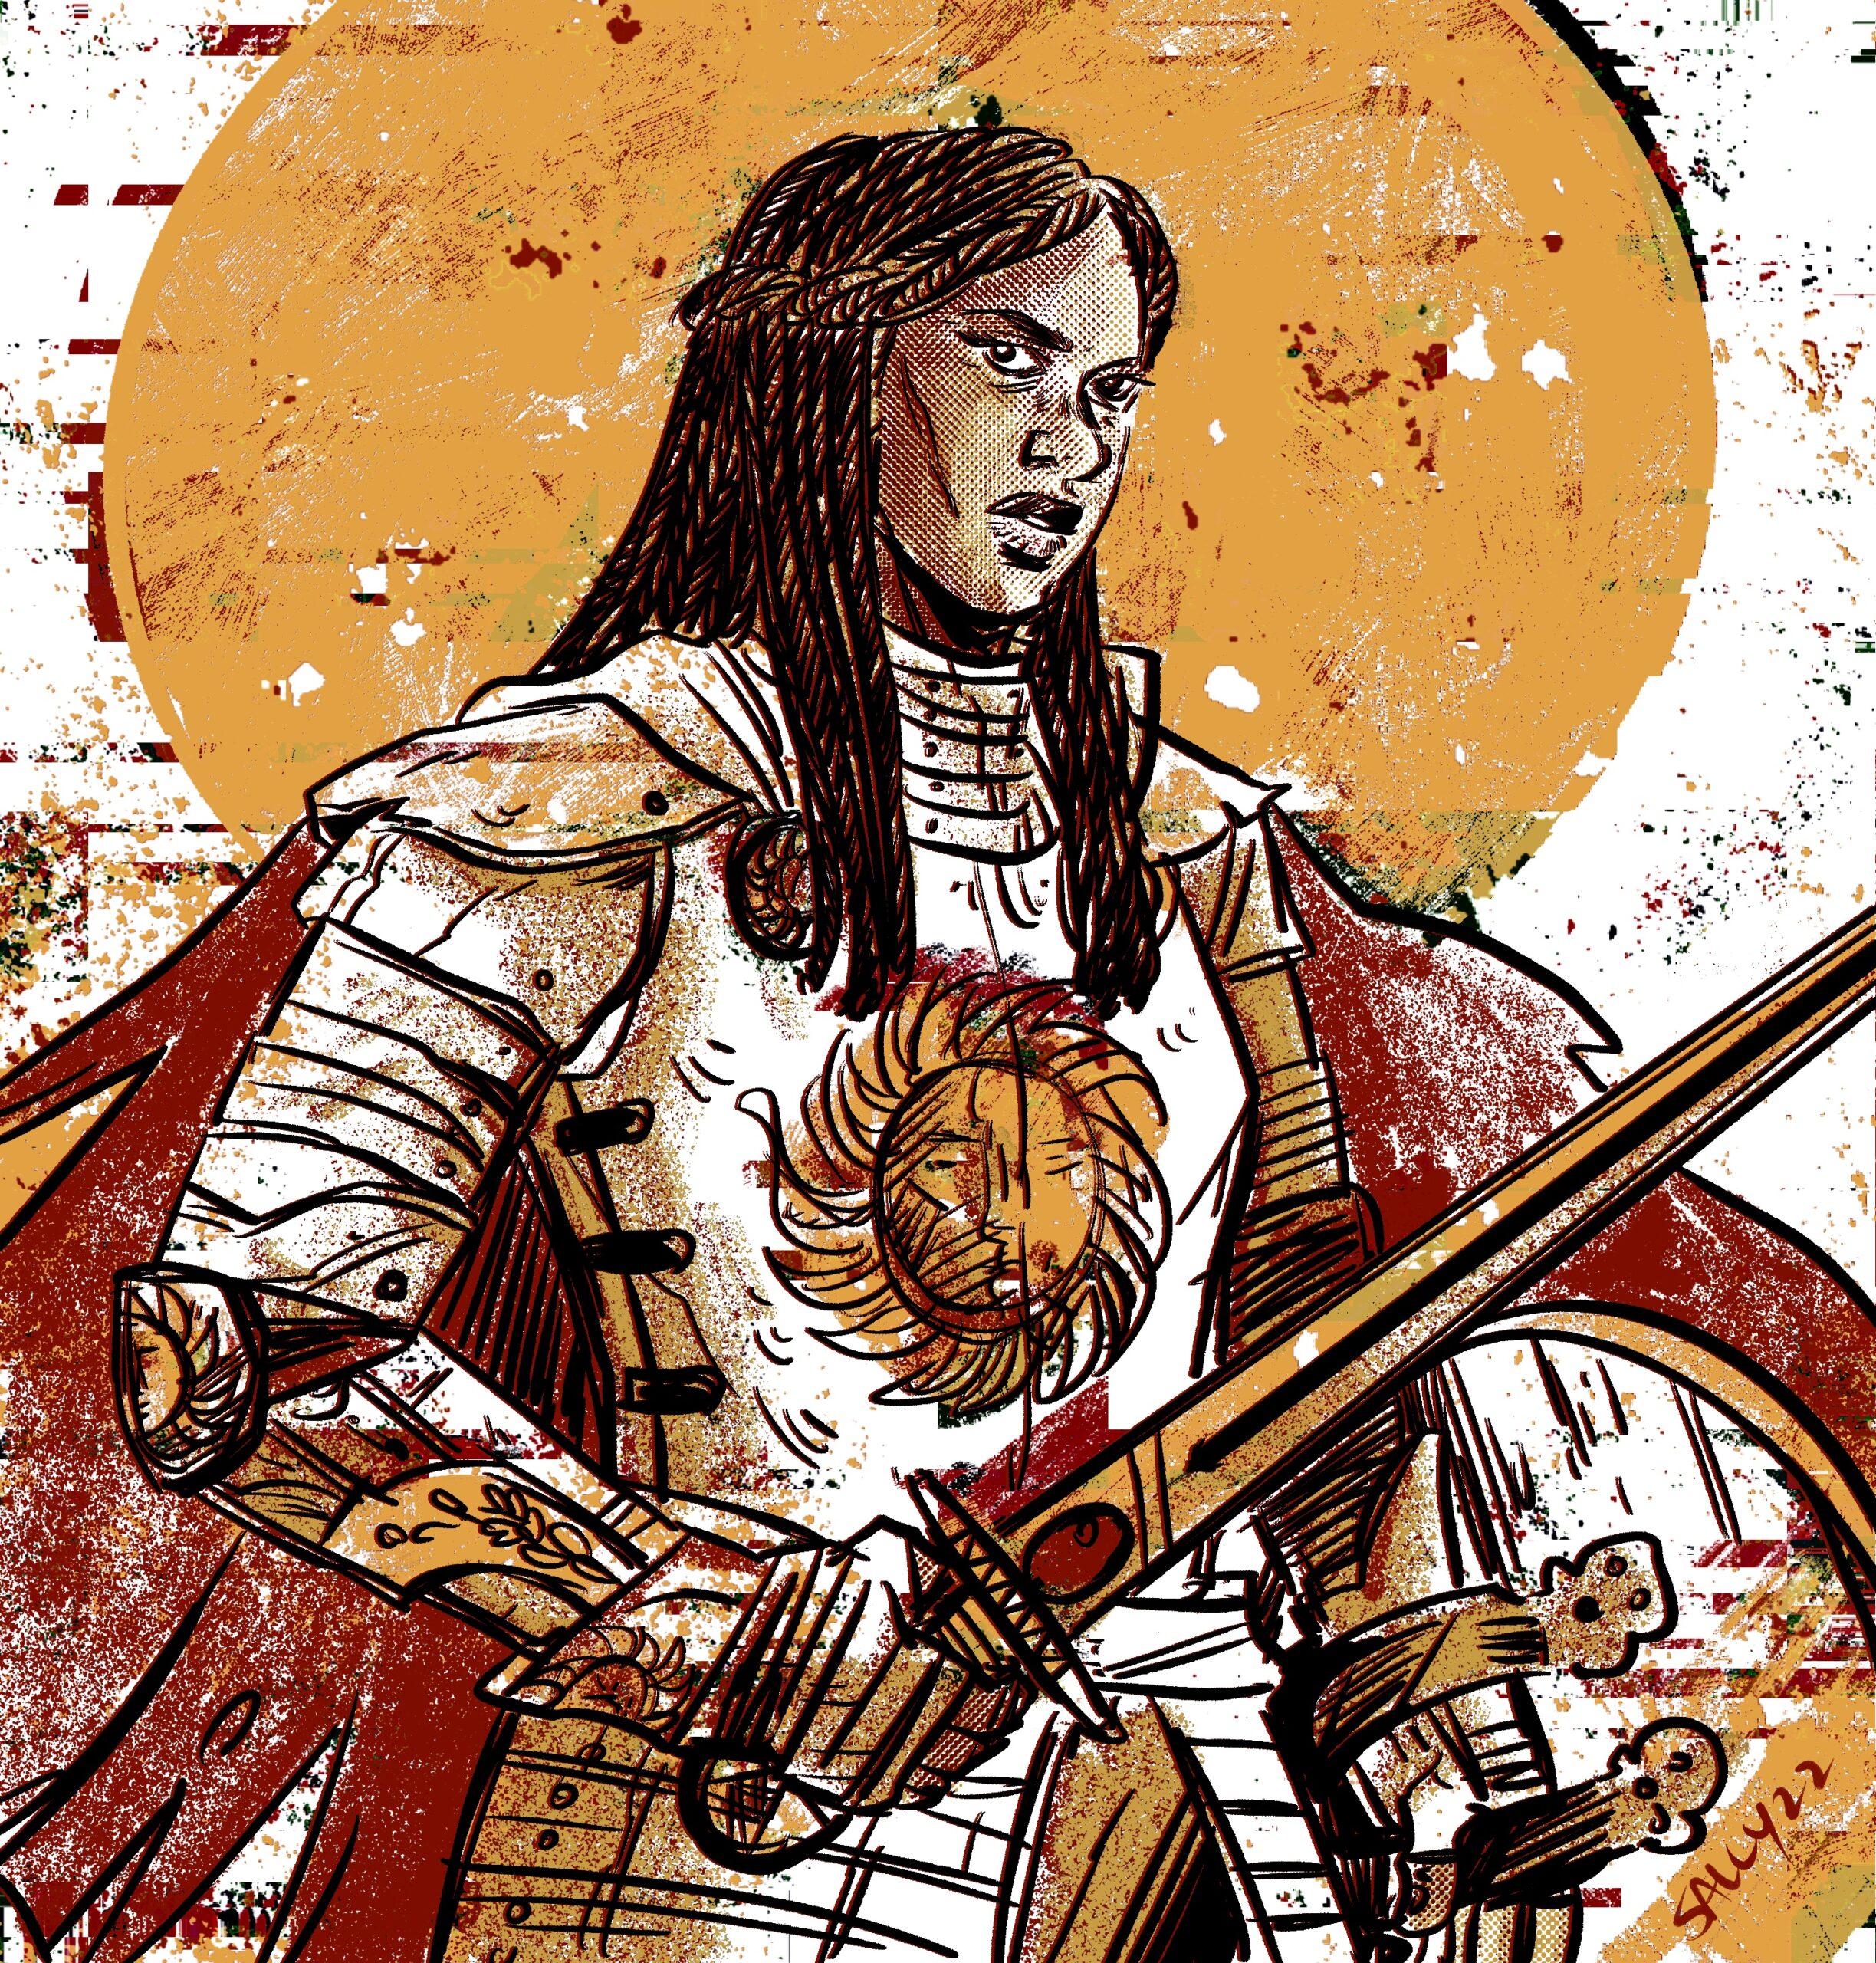 A red-caped knight stands holding a sword in front of a low-hanging sun, imagery echoed in the sun emblazoned on the chest of her armor.